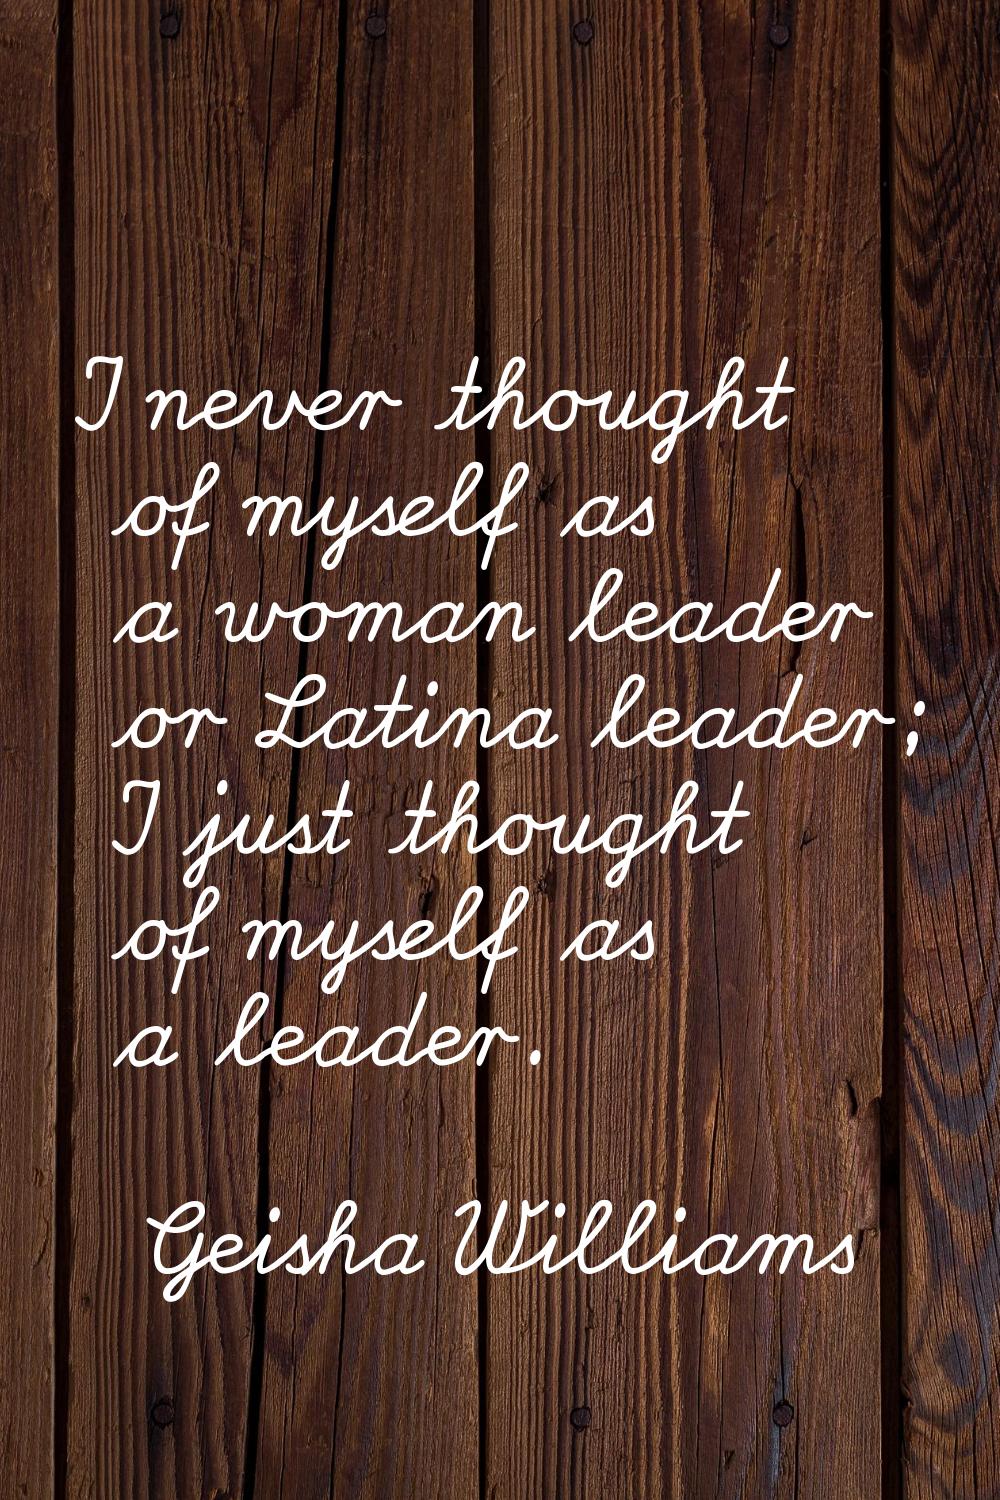 I never thought of myself as a woman leader or Latina leader; I just thought of myself as a leader.